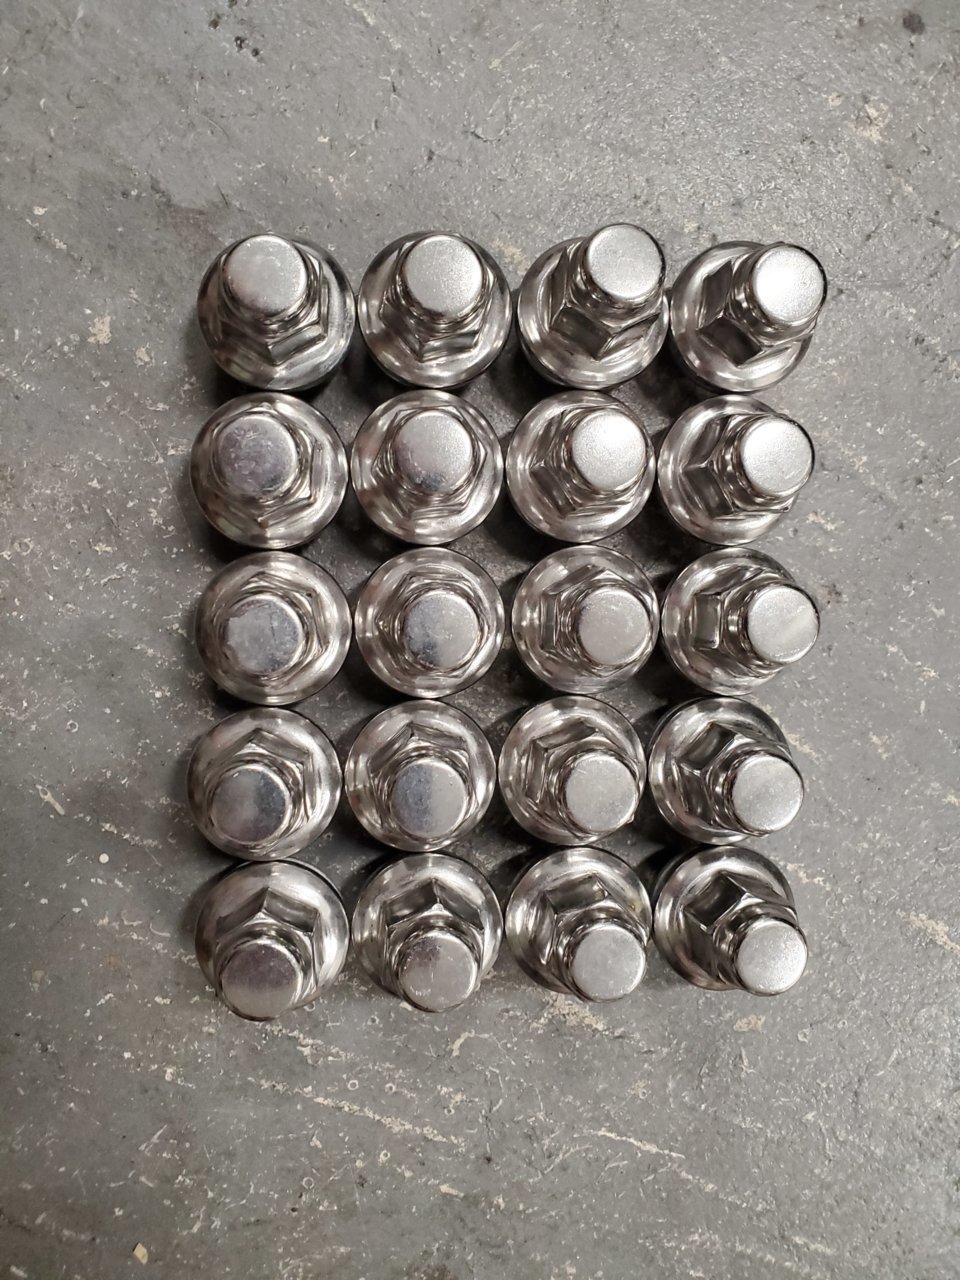 I am looking for a deal on a set of 20 Toyota lug nuts for 2nd/3rd gen Tundra factory alloy 2019 Toyota Tundra Lug Nut Torque Specs